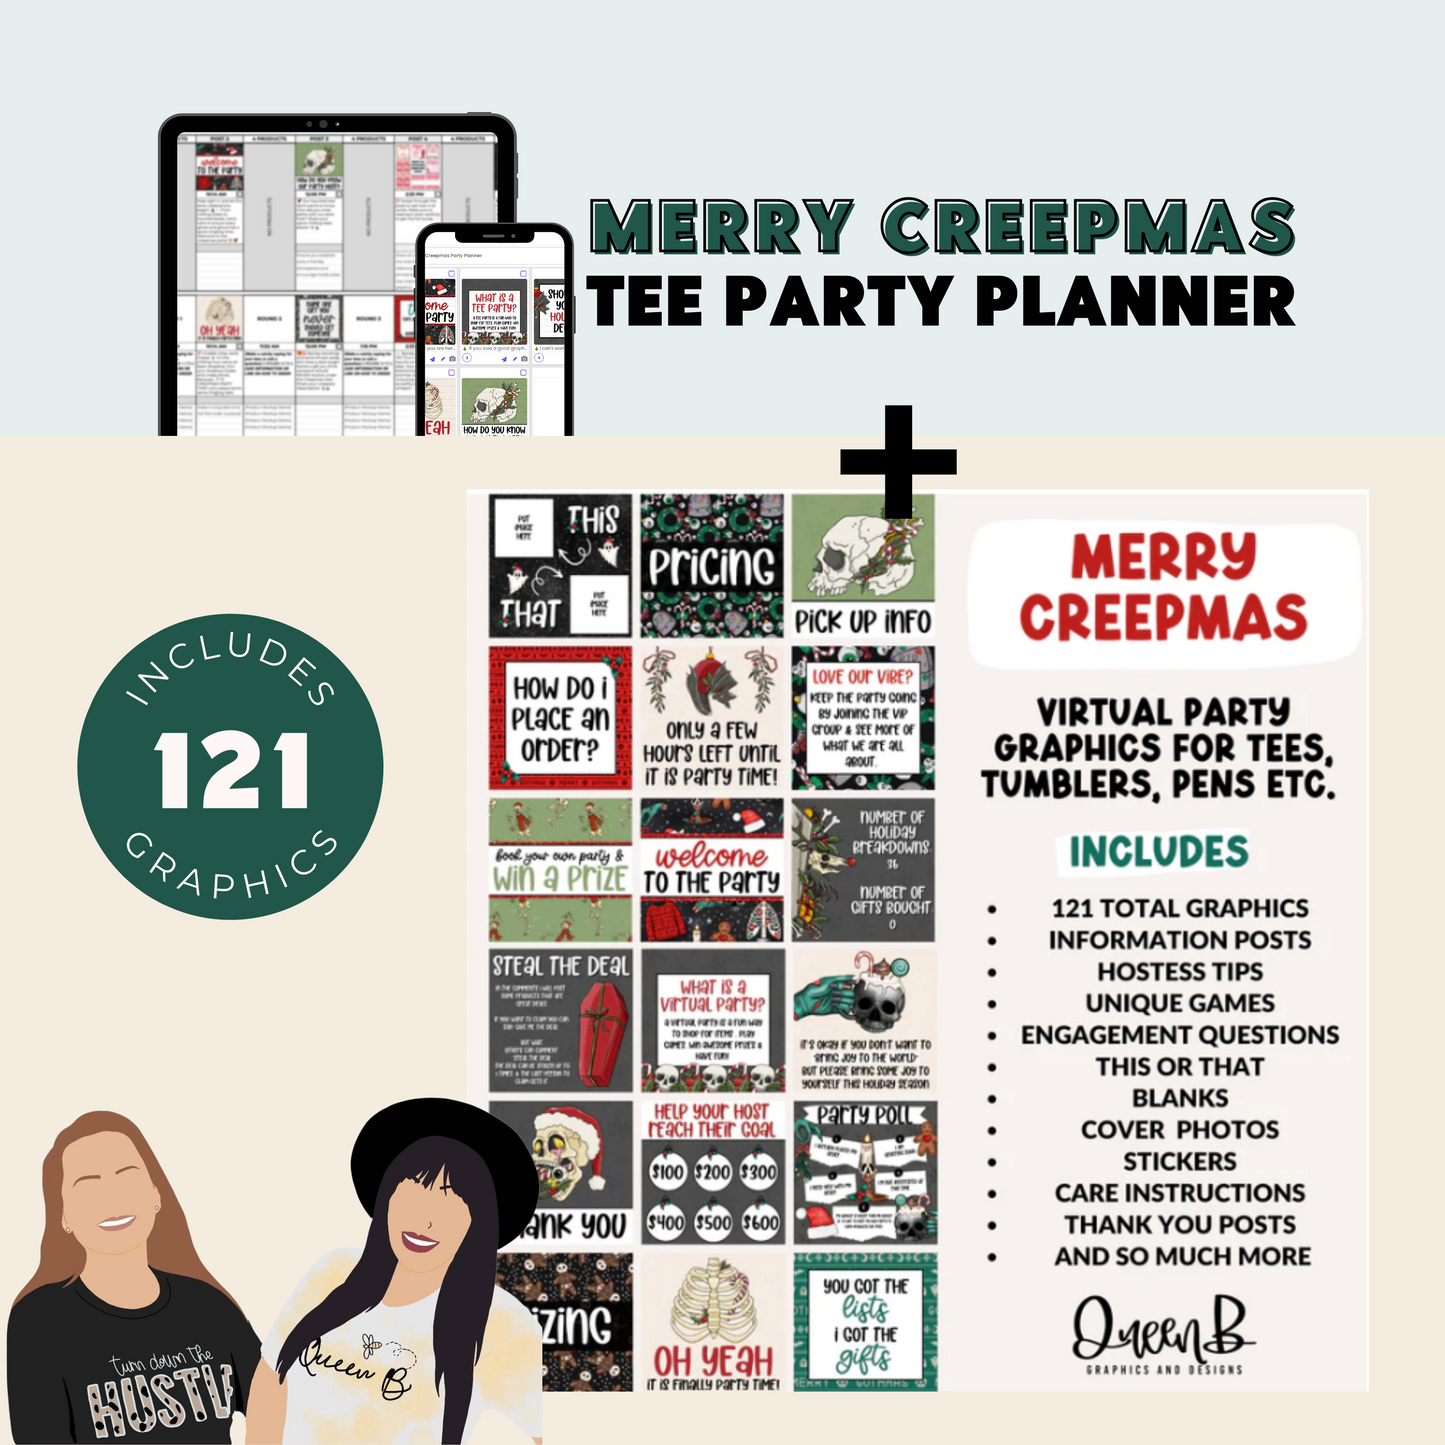 Merry Creepmas Tee Party Planner & Party Graphics